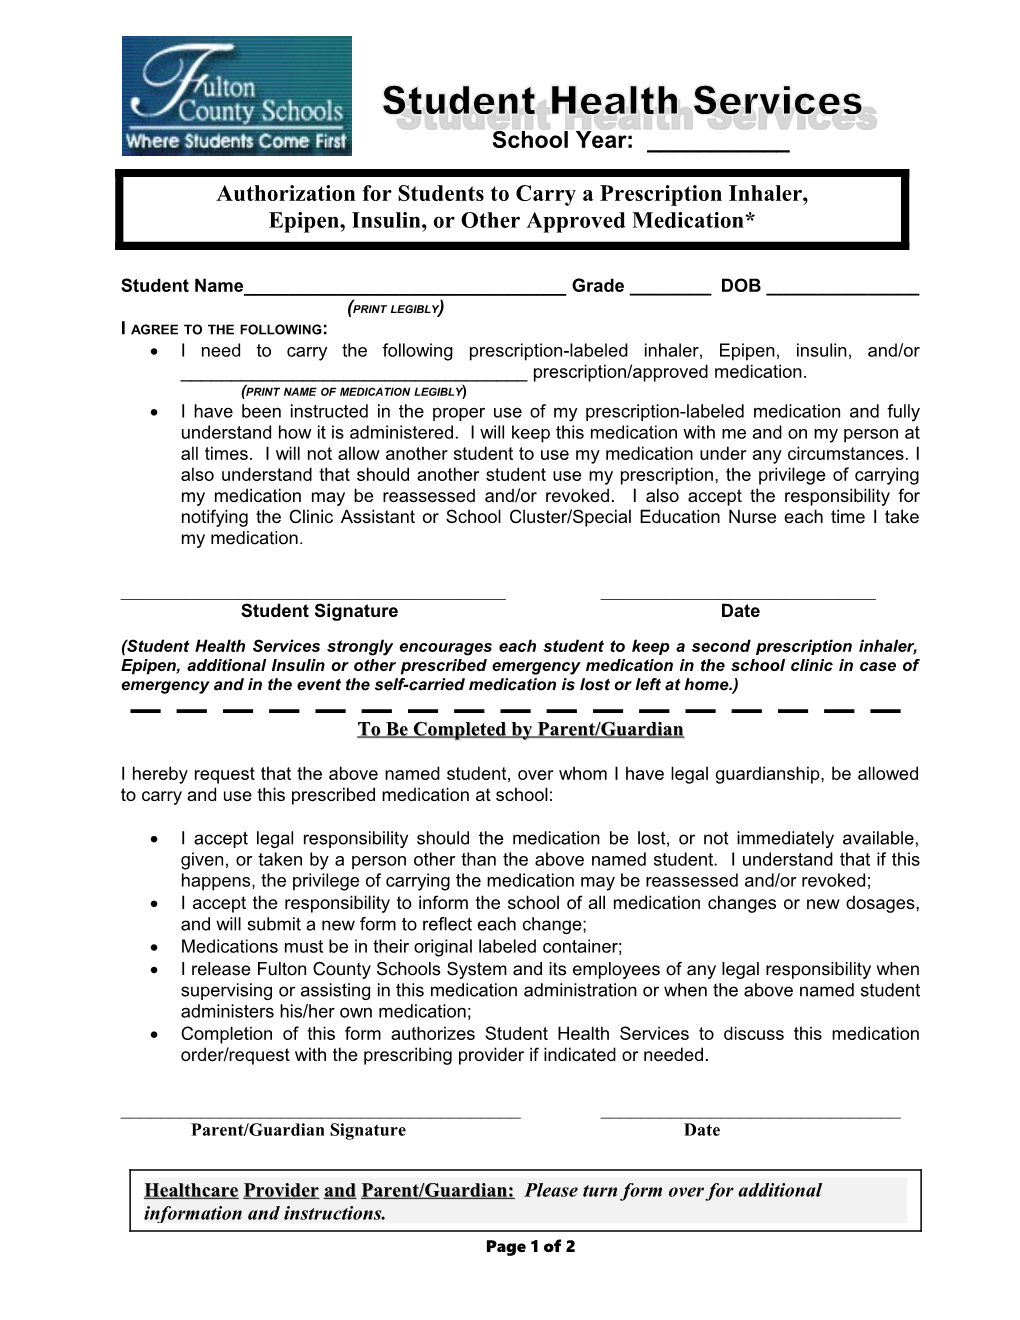 Authorization to Carry Medication Form